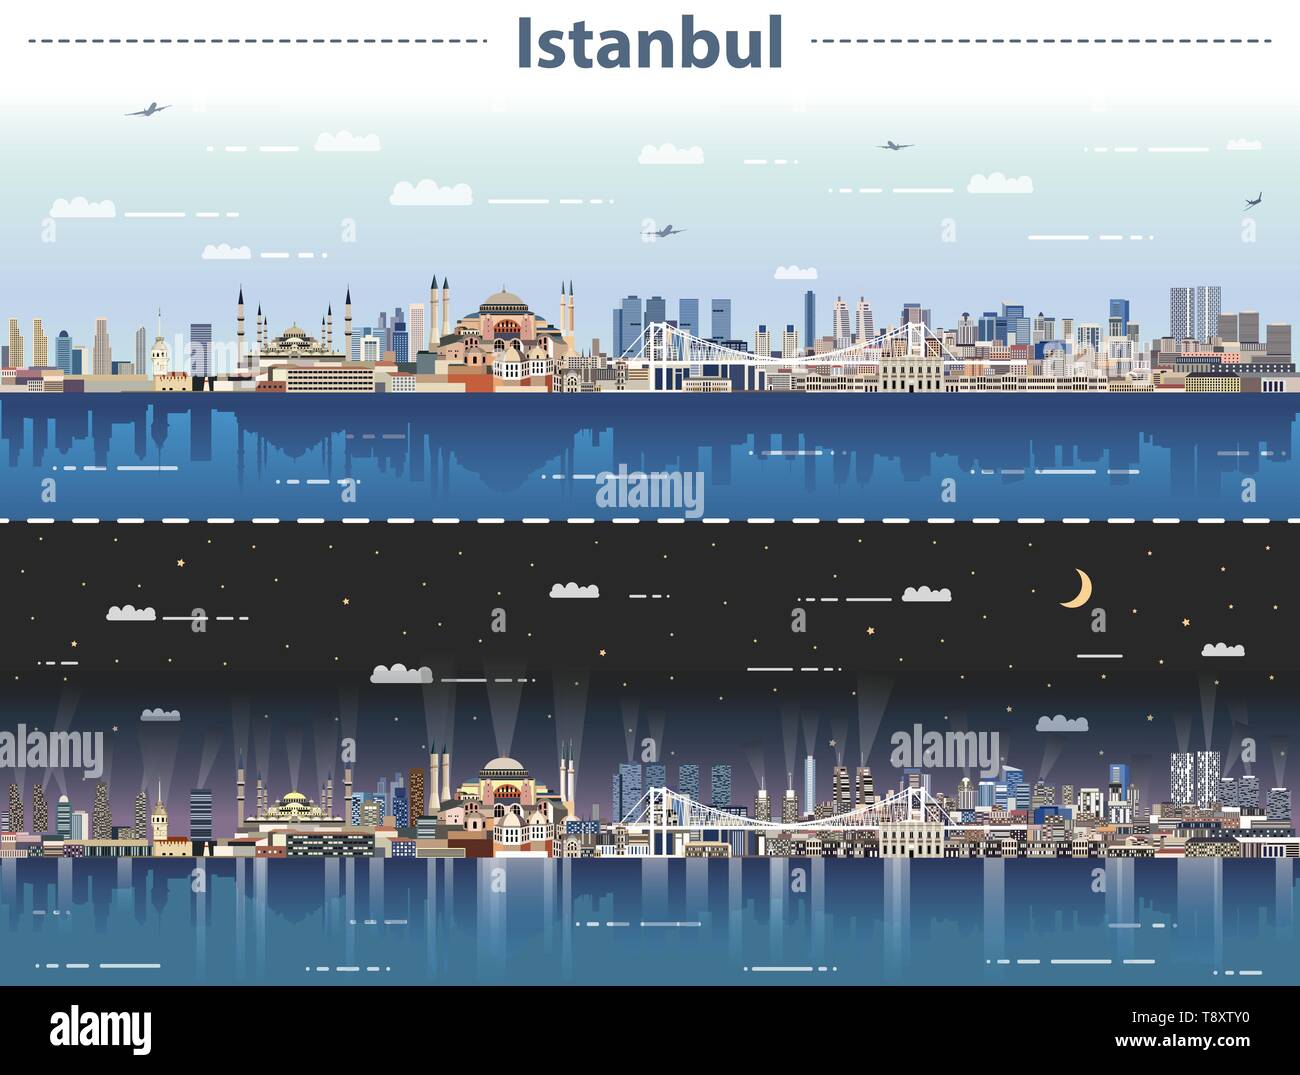 Istanbul city skyline at day and night vector illustration Stock Vector